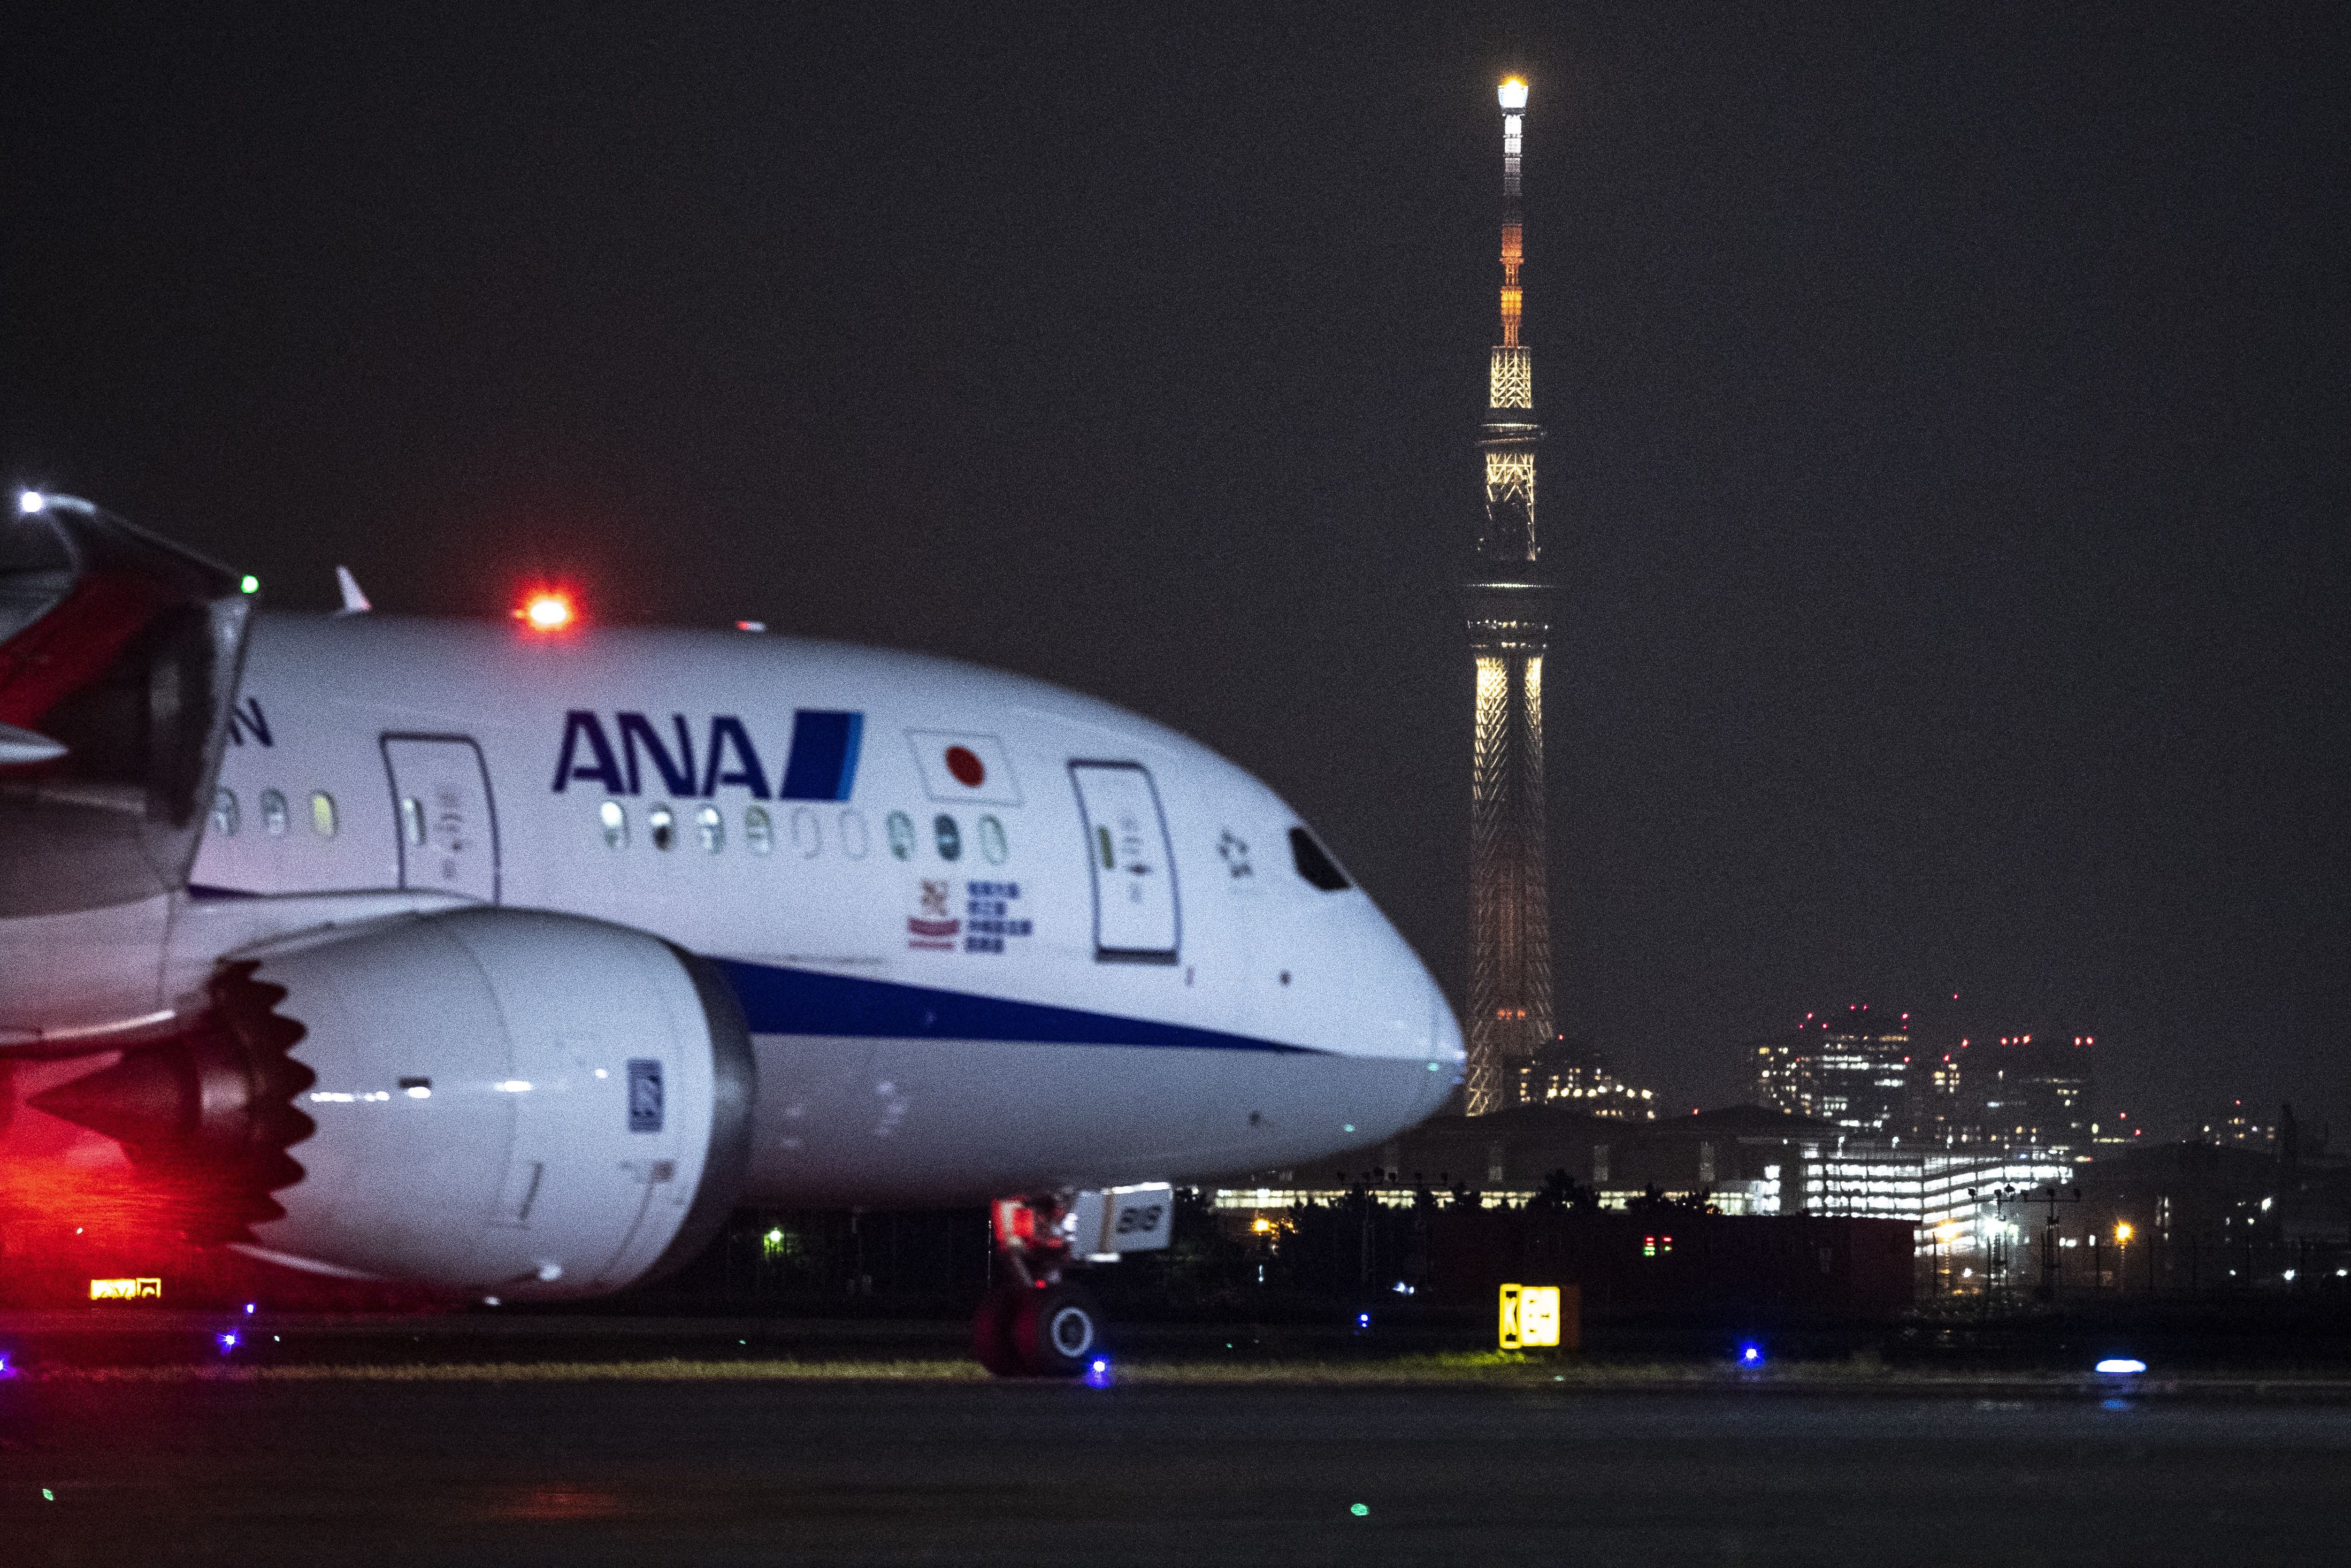 All Nippon Airways (ANA) aircraft on the tarmac of Tokyo's Haneda airport